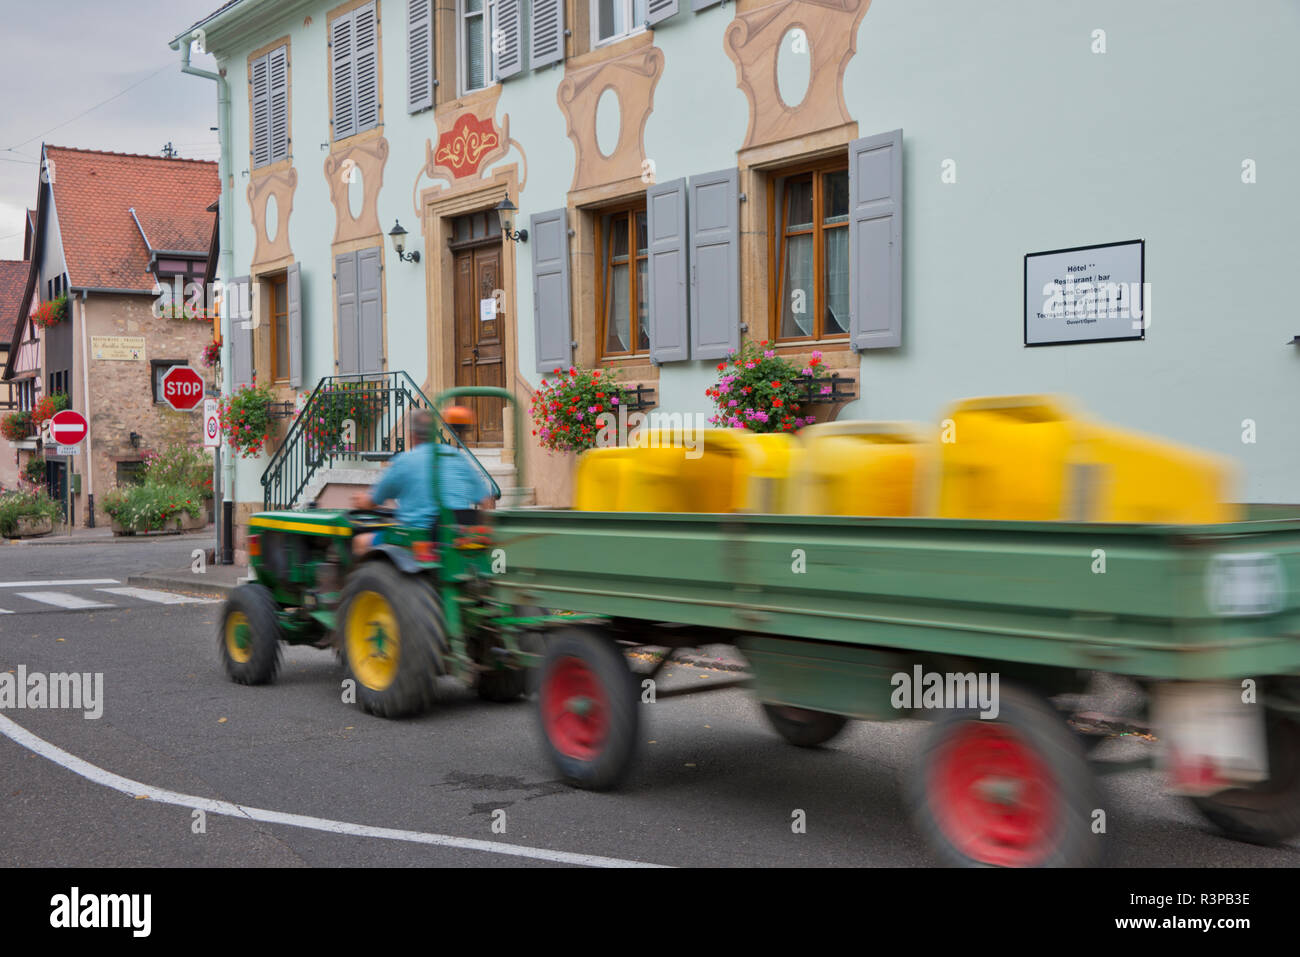 European Union, France, Alsace, Eguisheim village. Tractor pulling a green wagon with yellow containers through traditional Eguisheim village. Stock Photo